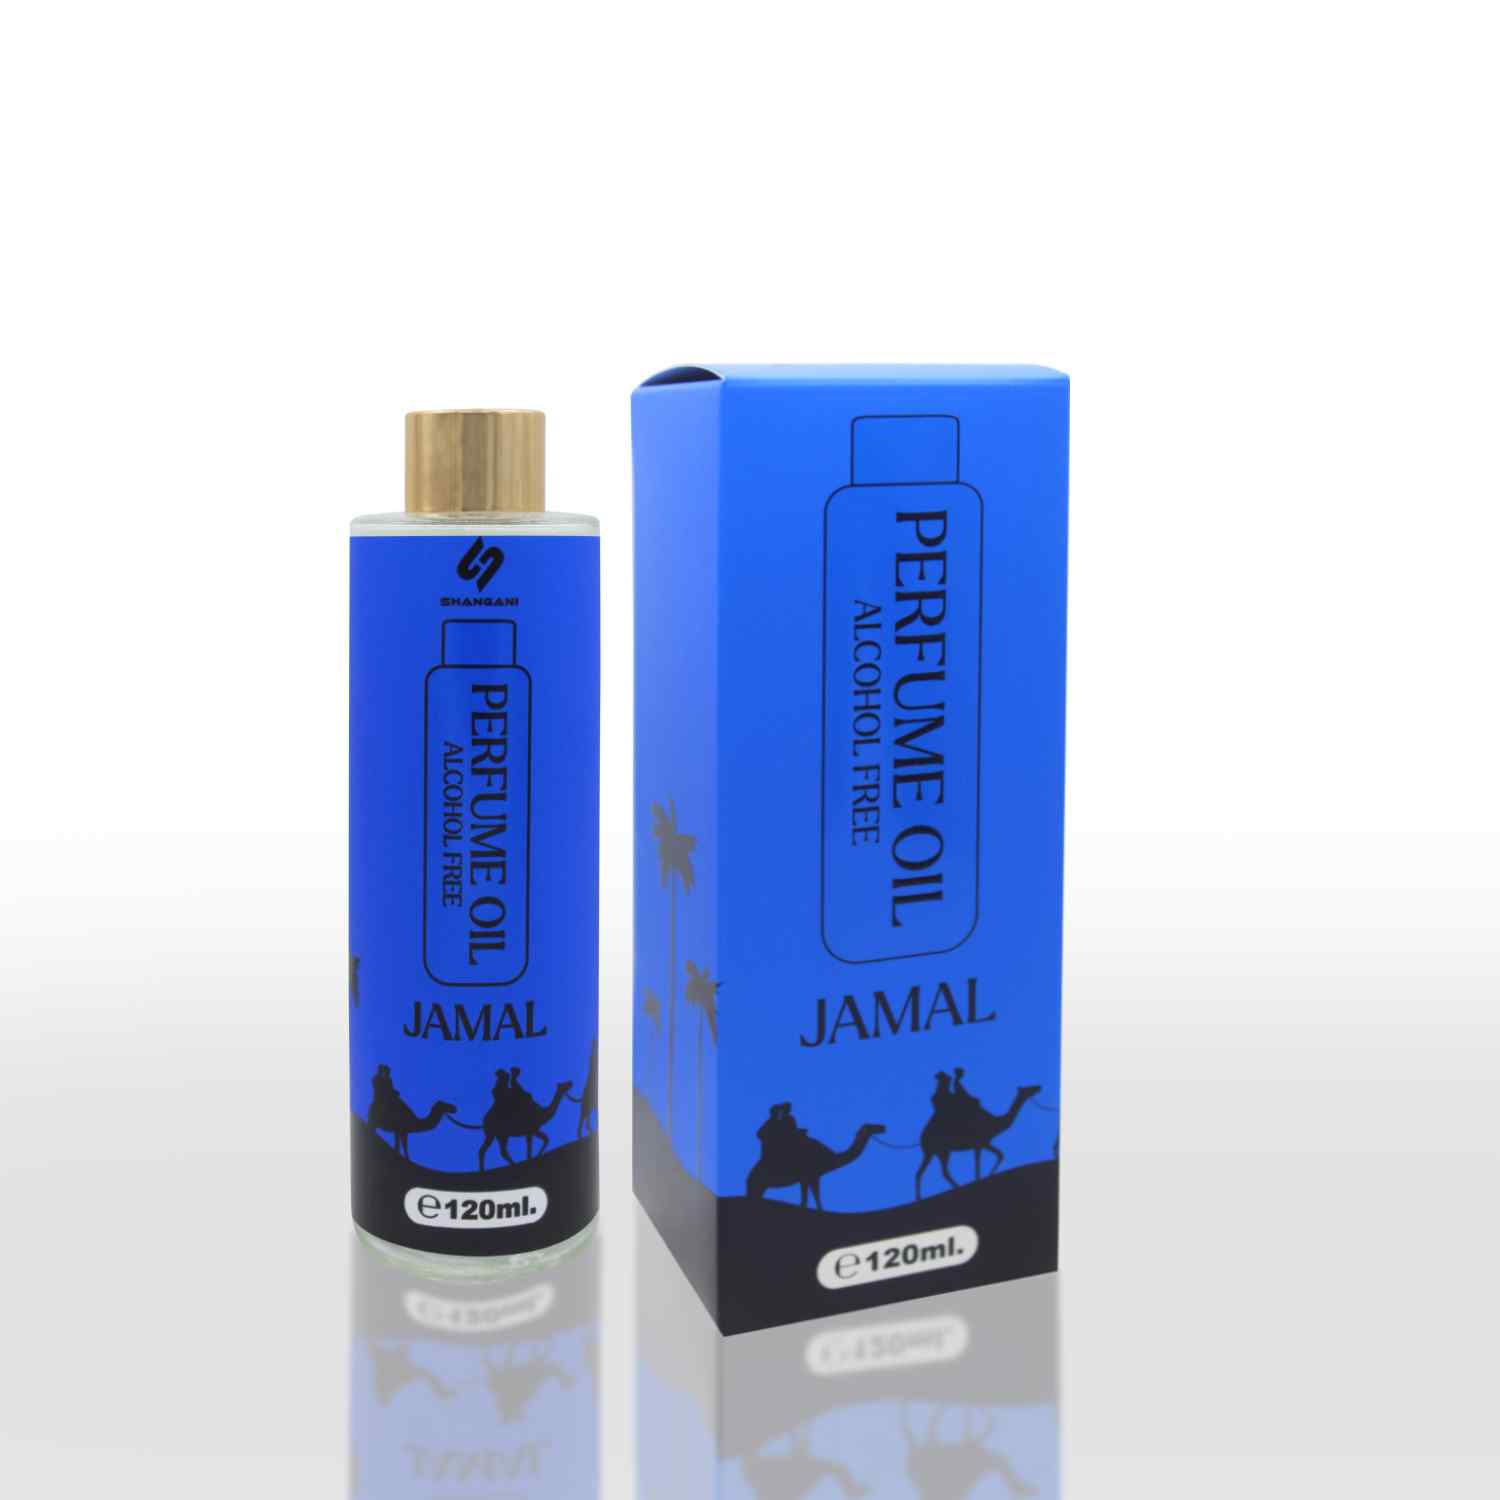 JAMAL 120ml of Shangani which is Alcohol free perfume oil